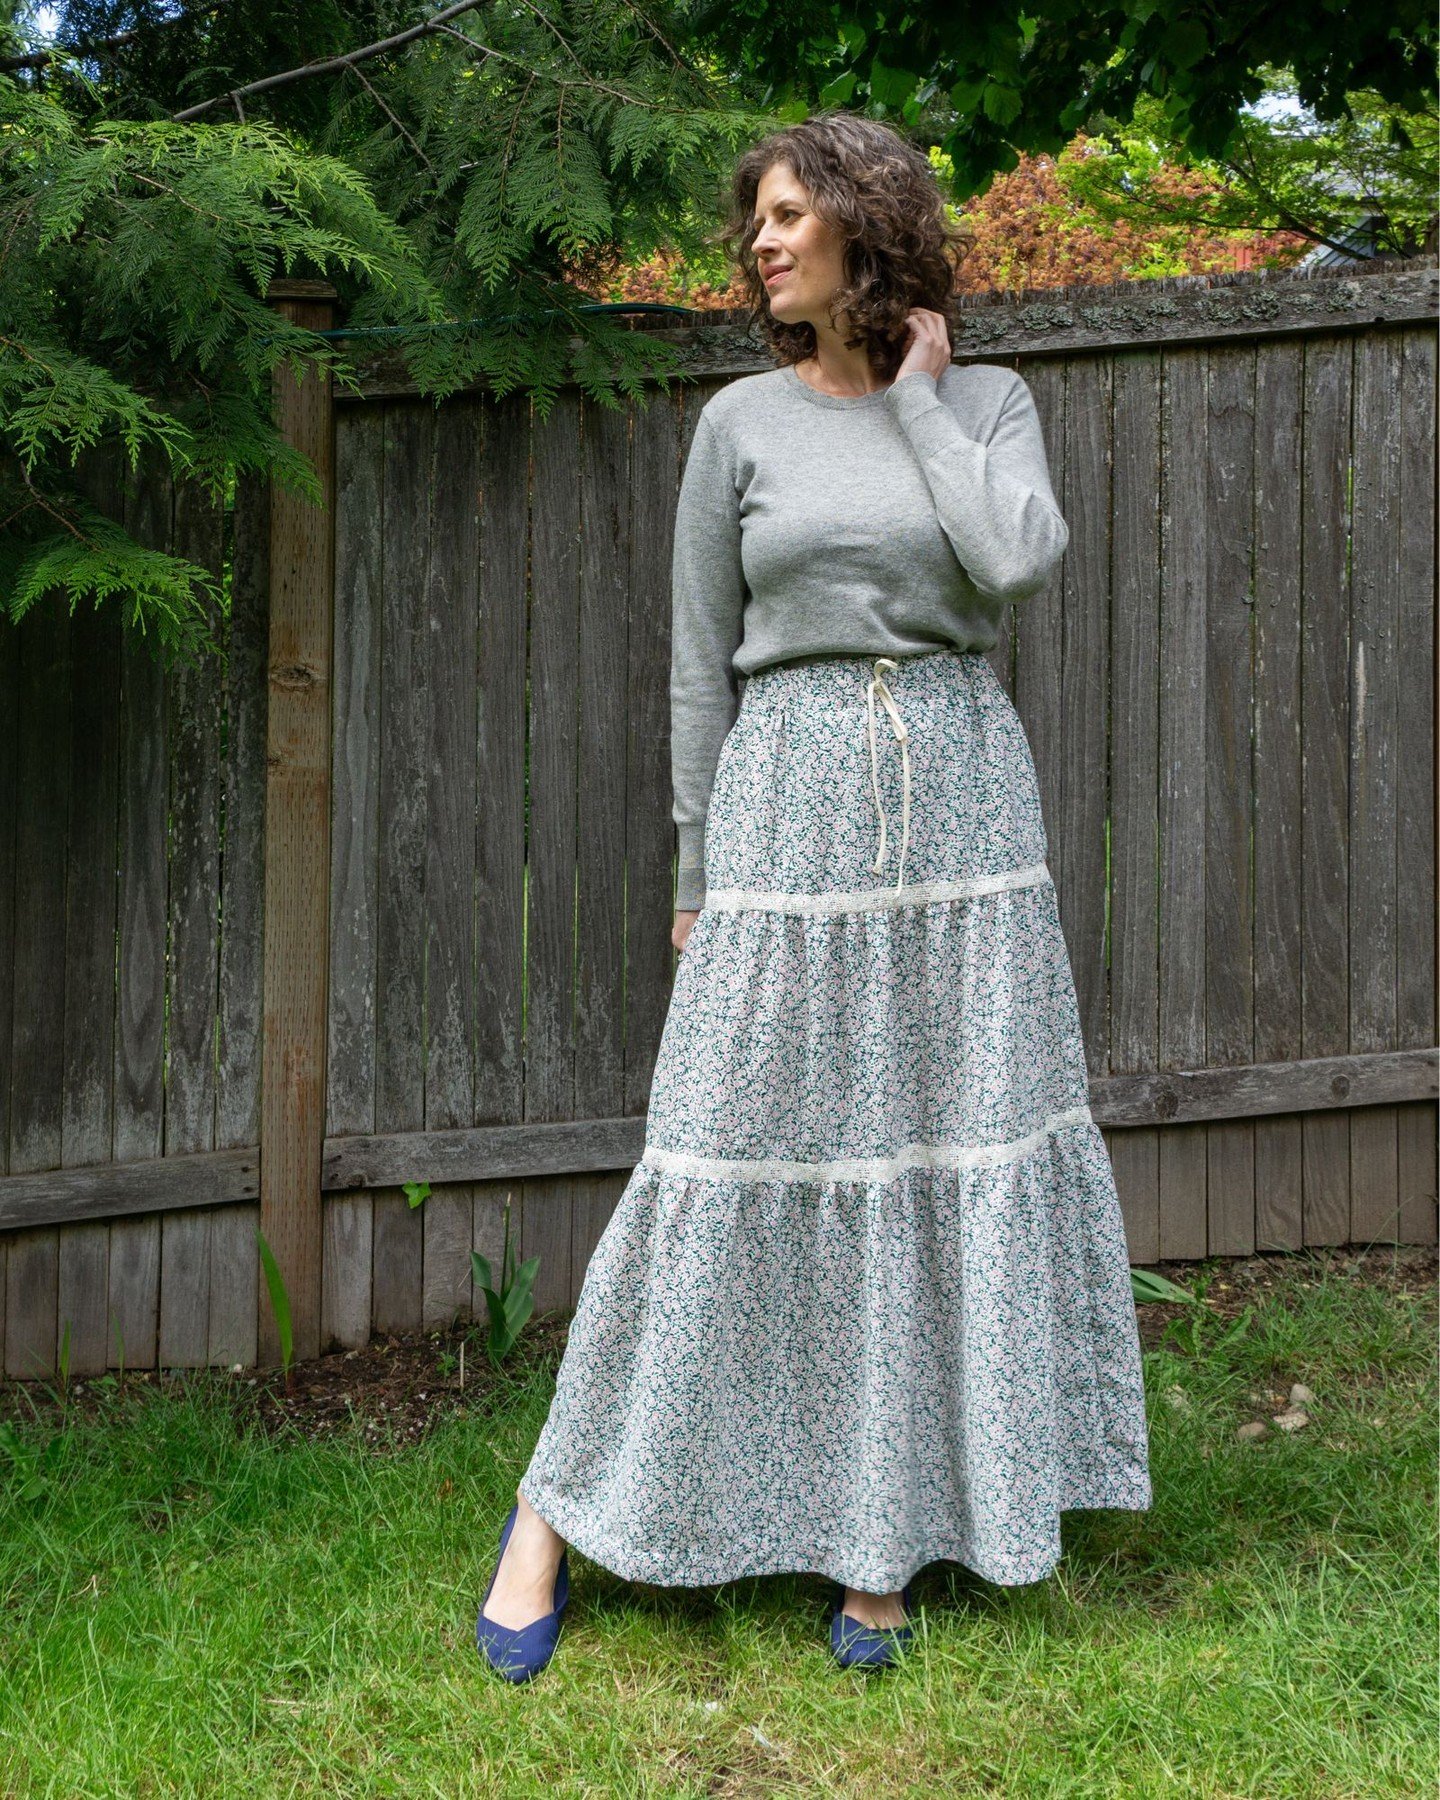 New self-drafted skirt! 🤗🧵 I have a new post on my Substack all about this elastic waist three-tier skirt. Over the past few weeks, I&rsquo;ve been sharing how to draft this skirt and now I'm sharing my own version&mdash;made to my custom measureme